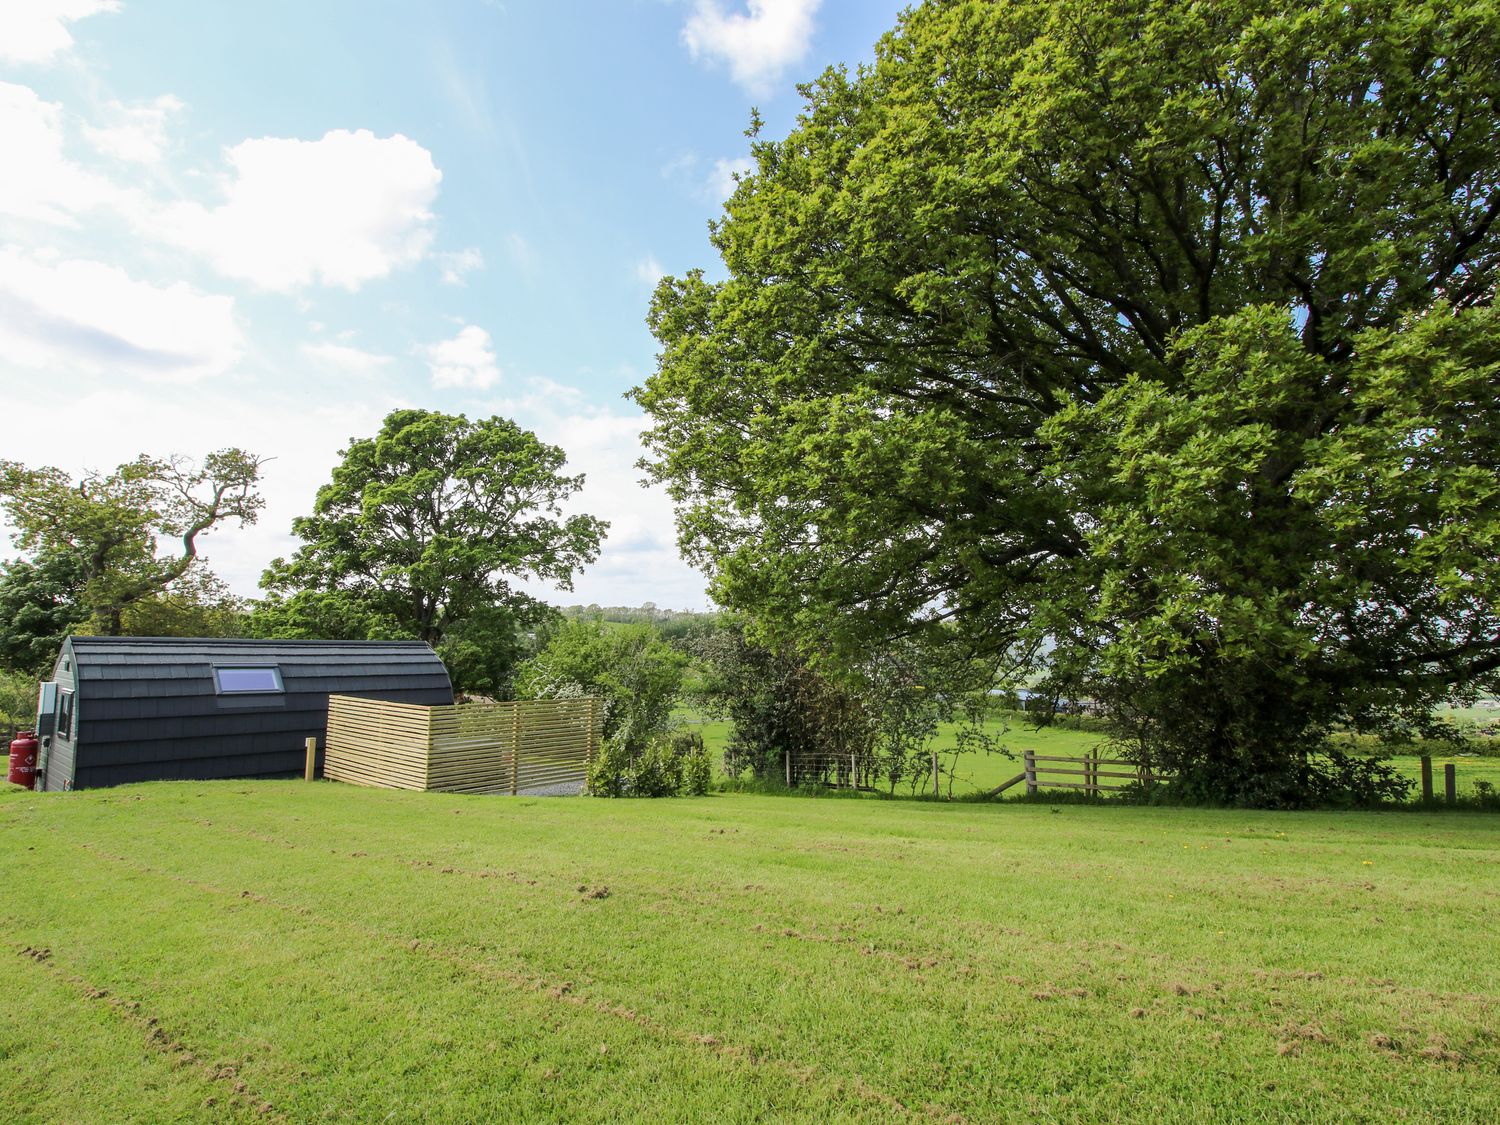 Deri Pod in Guilsfield, Powys, romantic, countryside views, adults-only, stylish, open-plan living,.